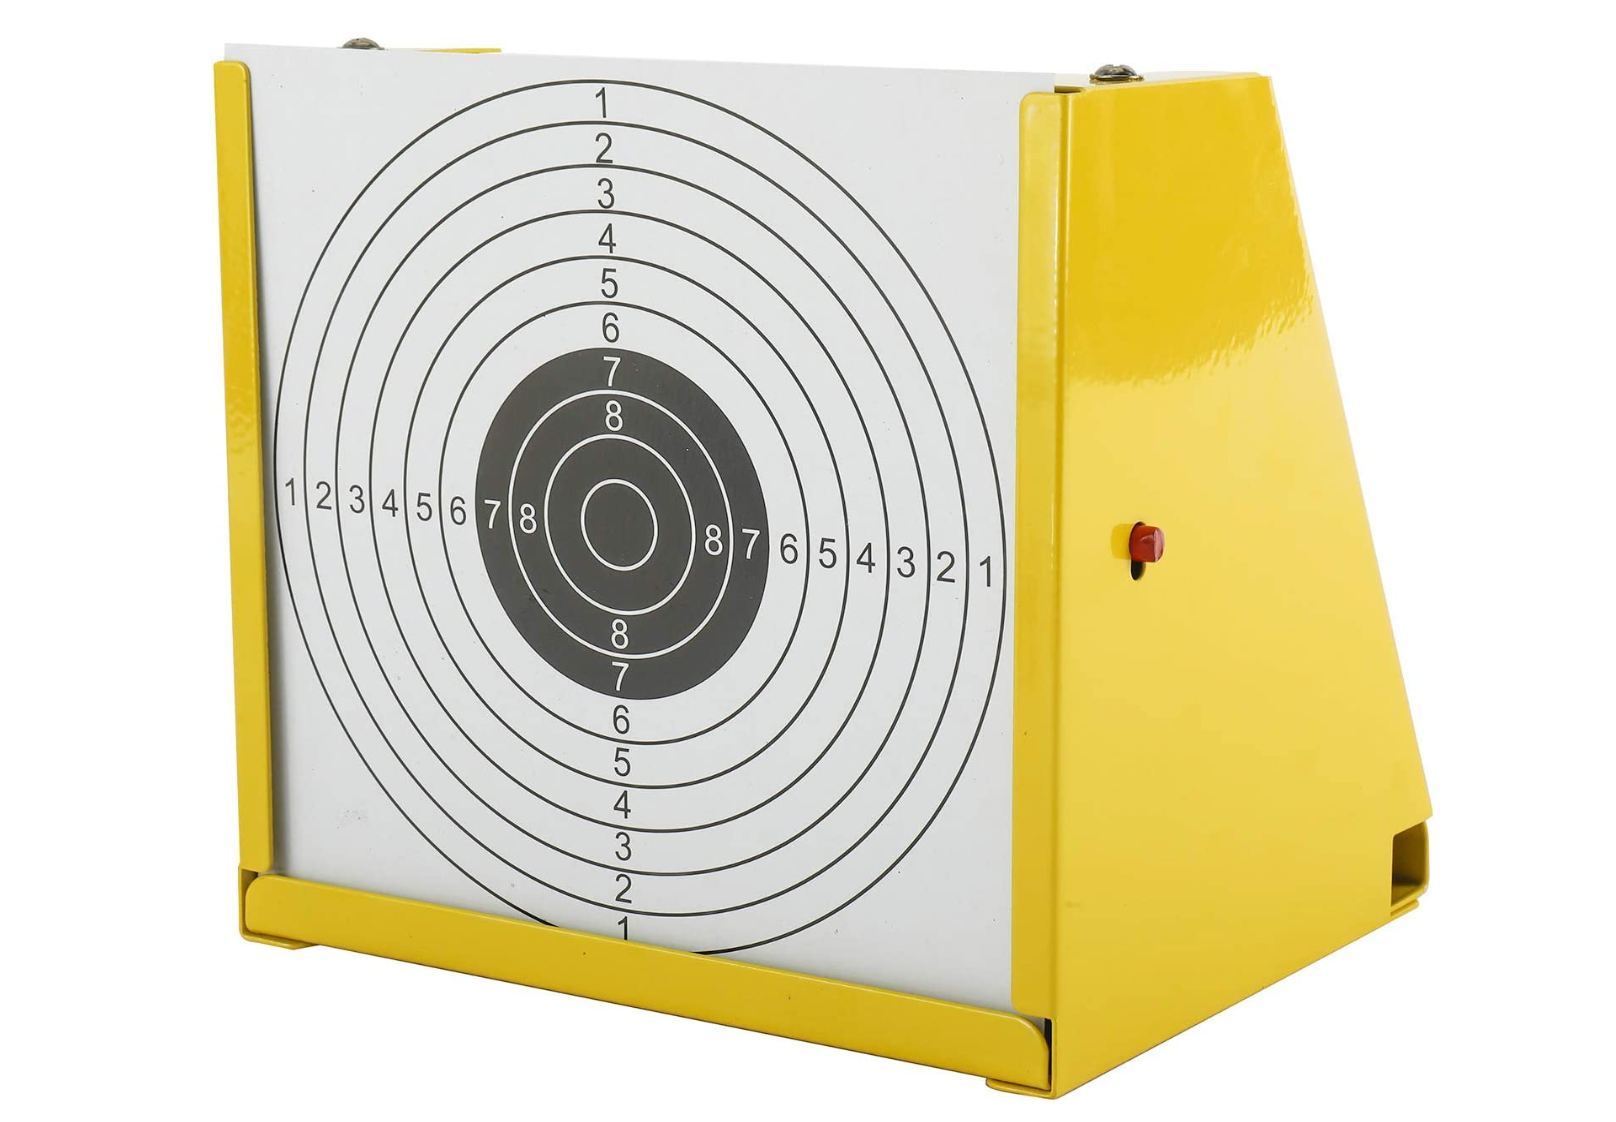 Sparkfire Metal Pellet Trap Target, Paper Target and Resetting Metal Silhouettes